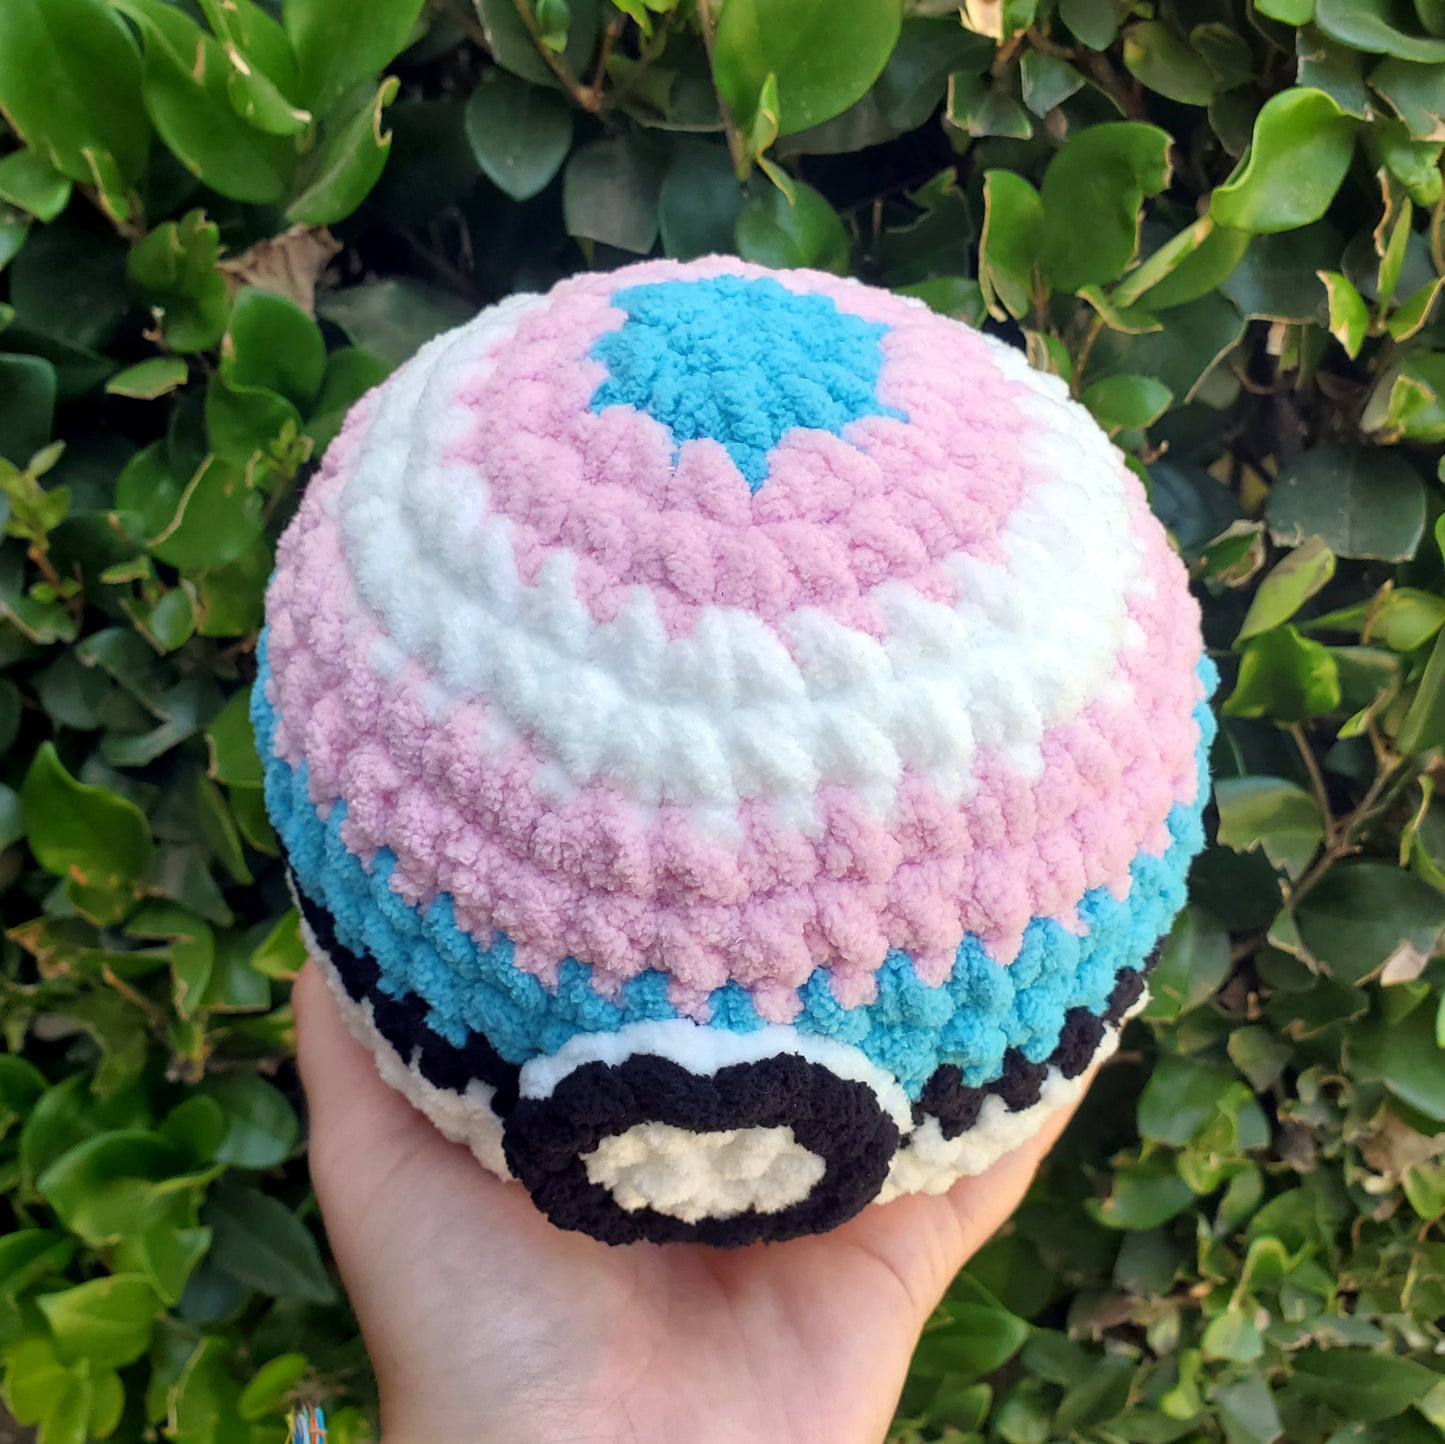 Trans Pride Pokéball Plushie | Made by queer artist!